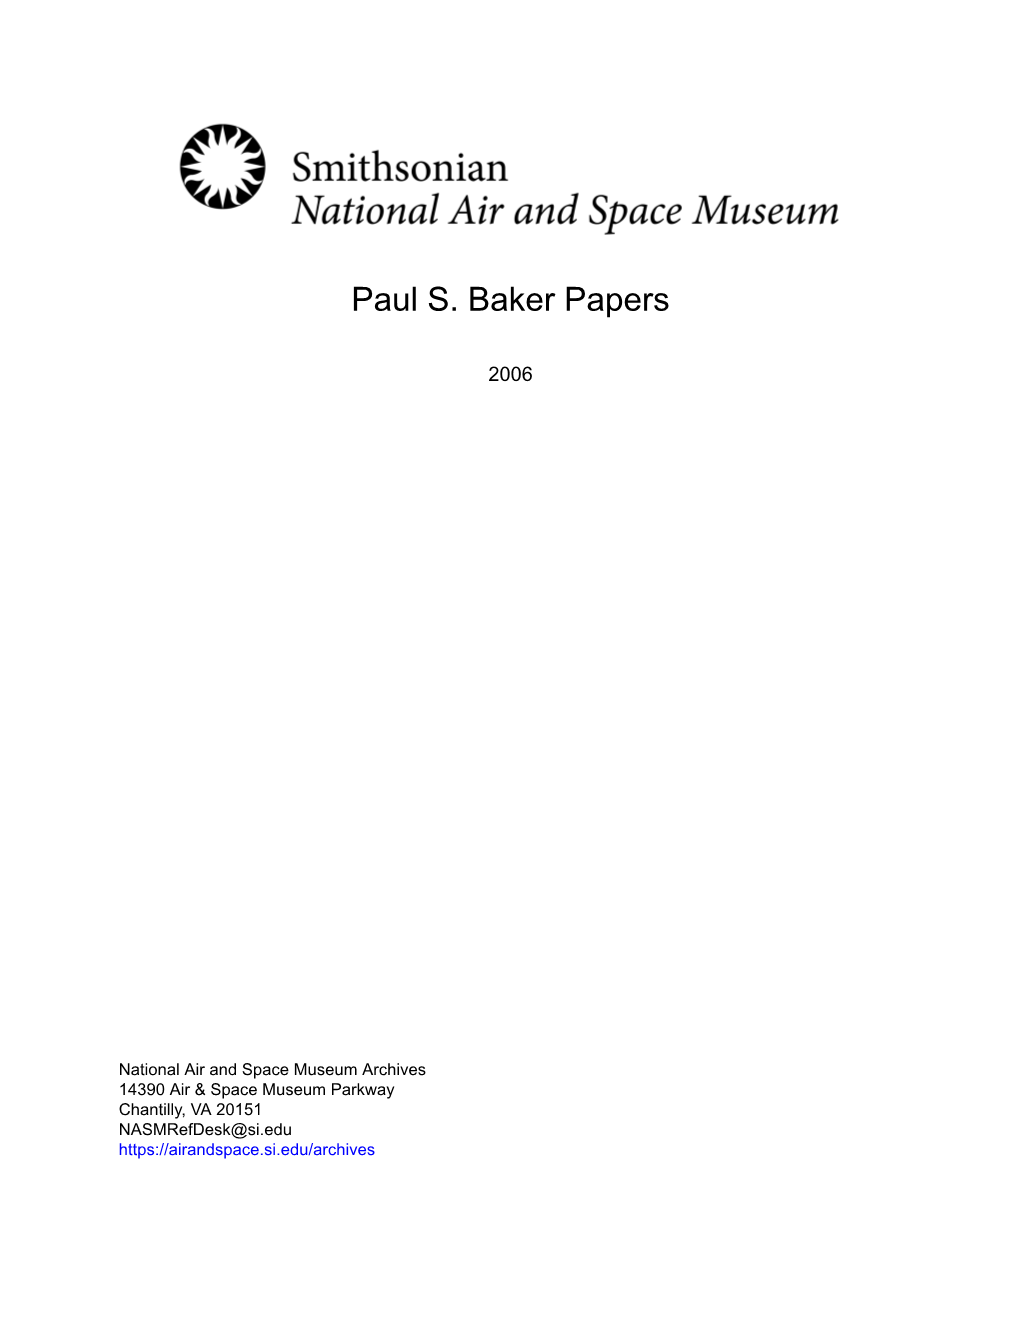 Paul S. Baker Papers